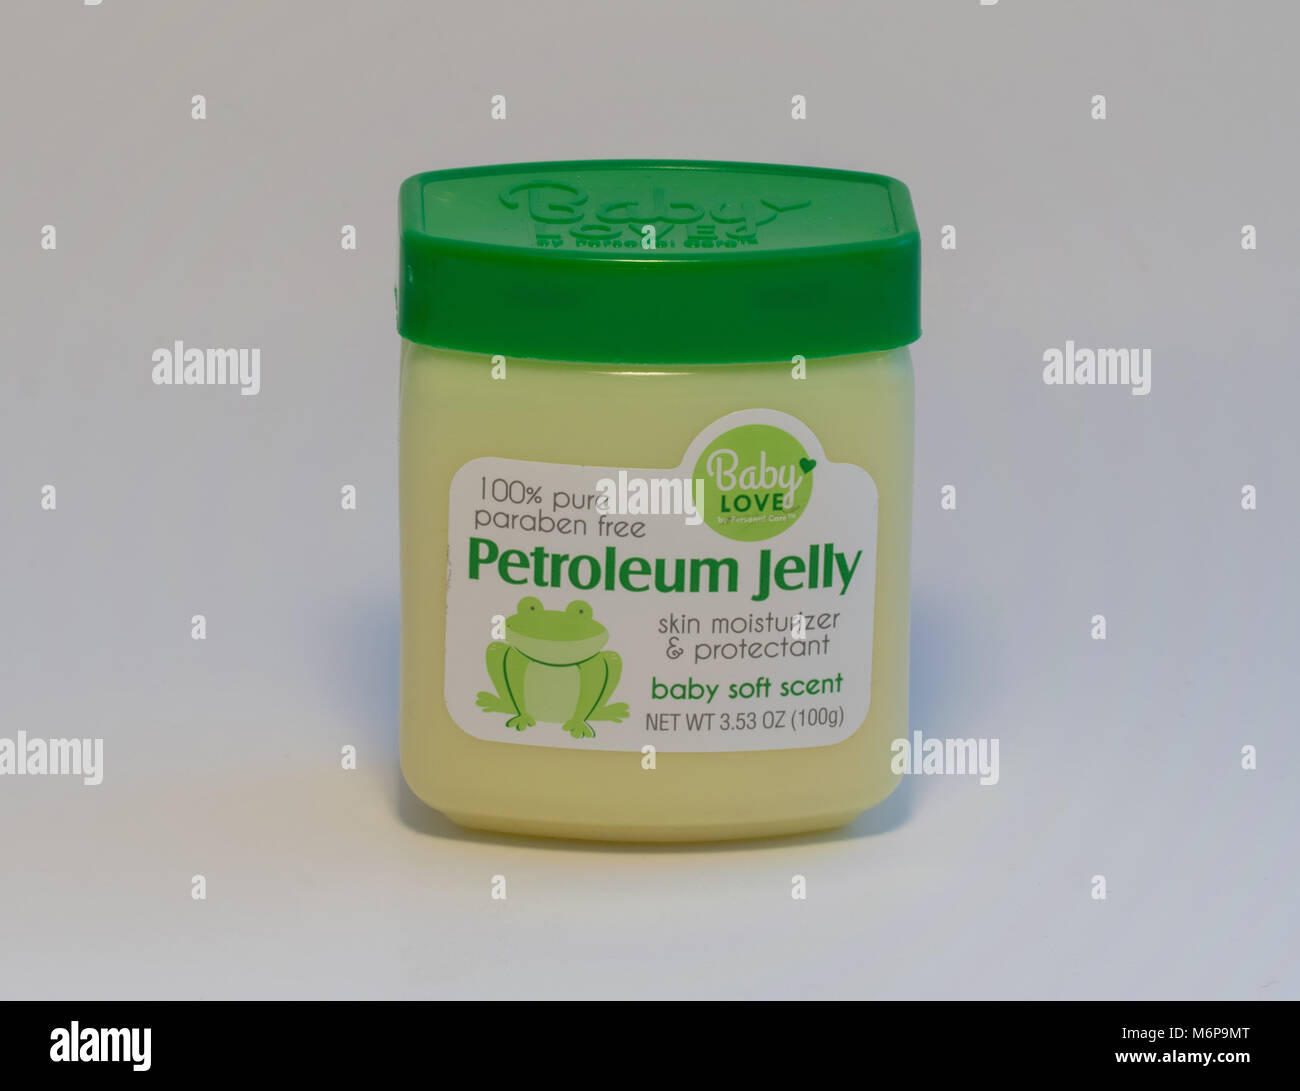 United States, Circa 2018: Petroleum Jelly jar for baby child care skin product product shot against white background. Illustrative Editorial Stock Photo